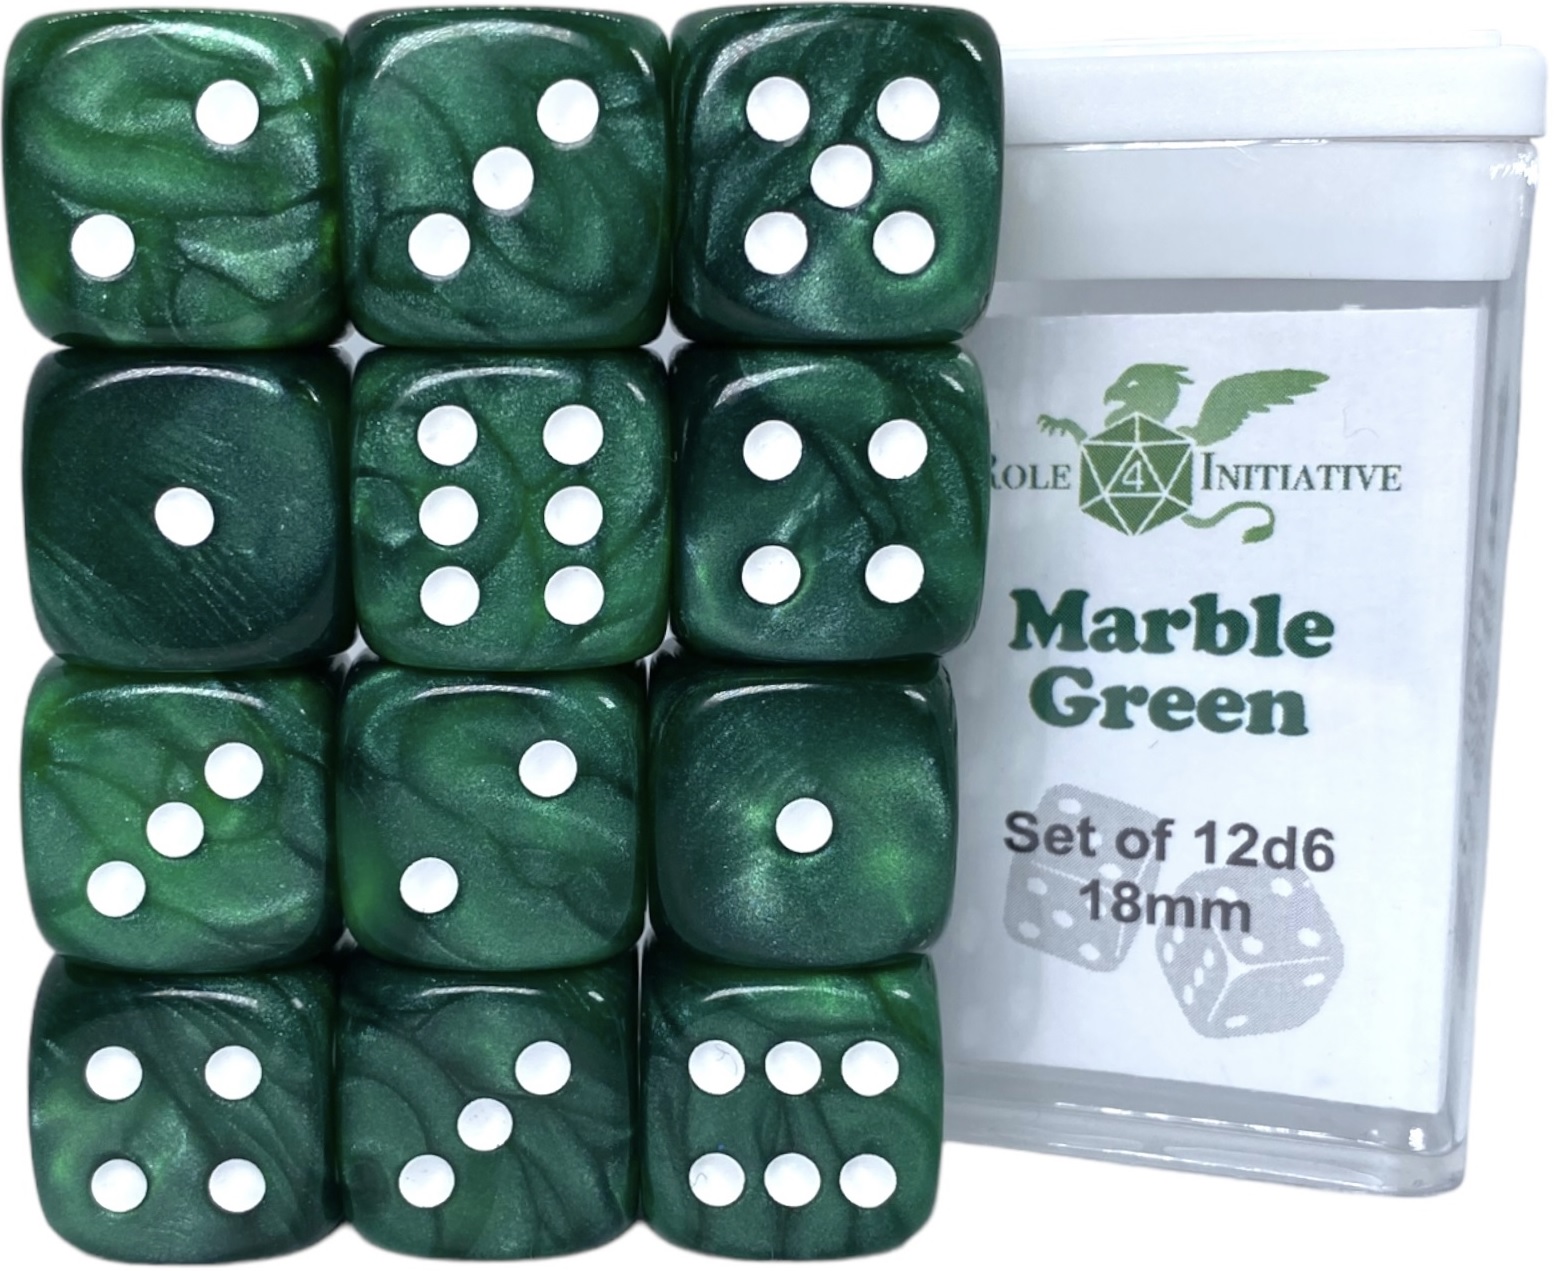 Role 4 Initiative: 12 D6 Pips Dice Set: Marble Green 18MM 